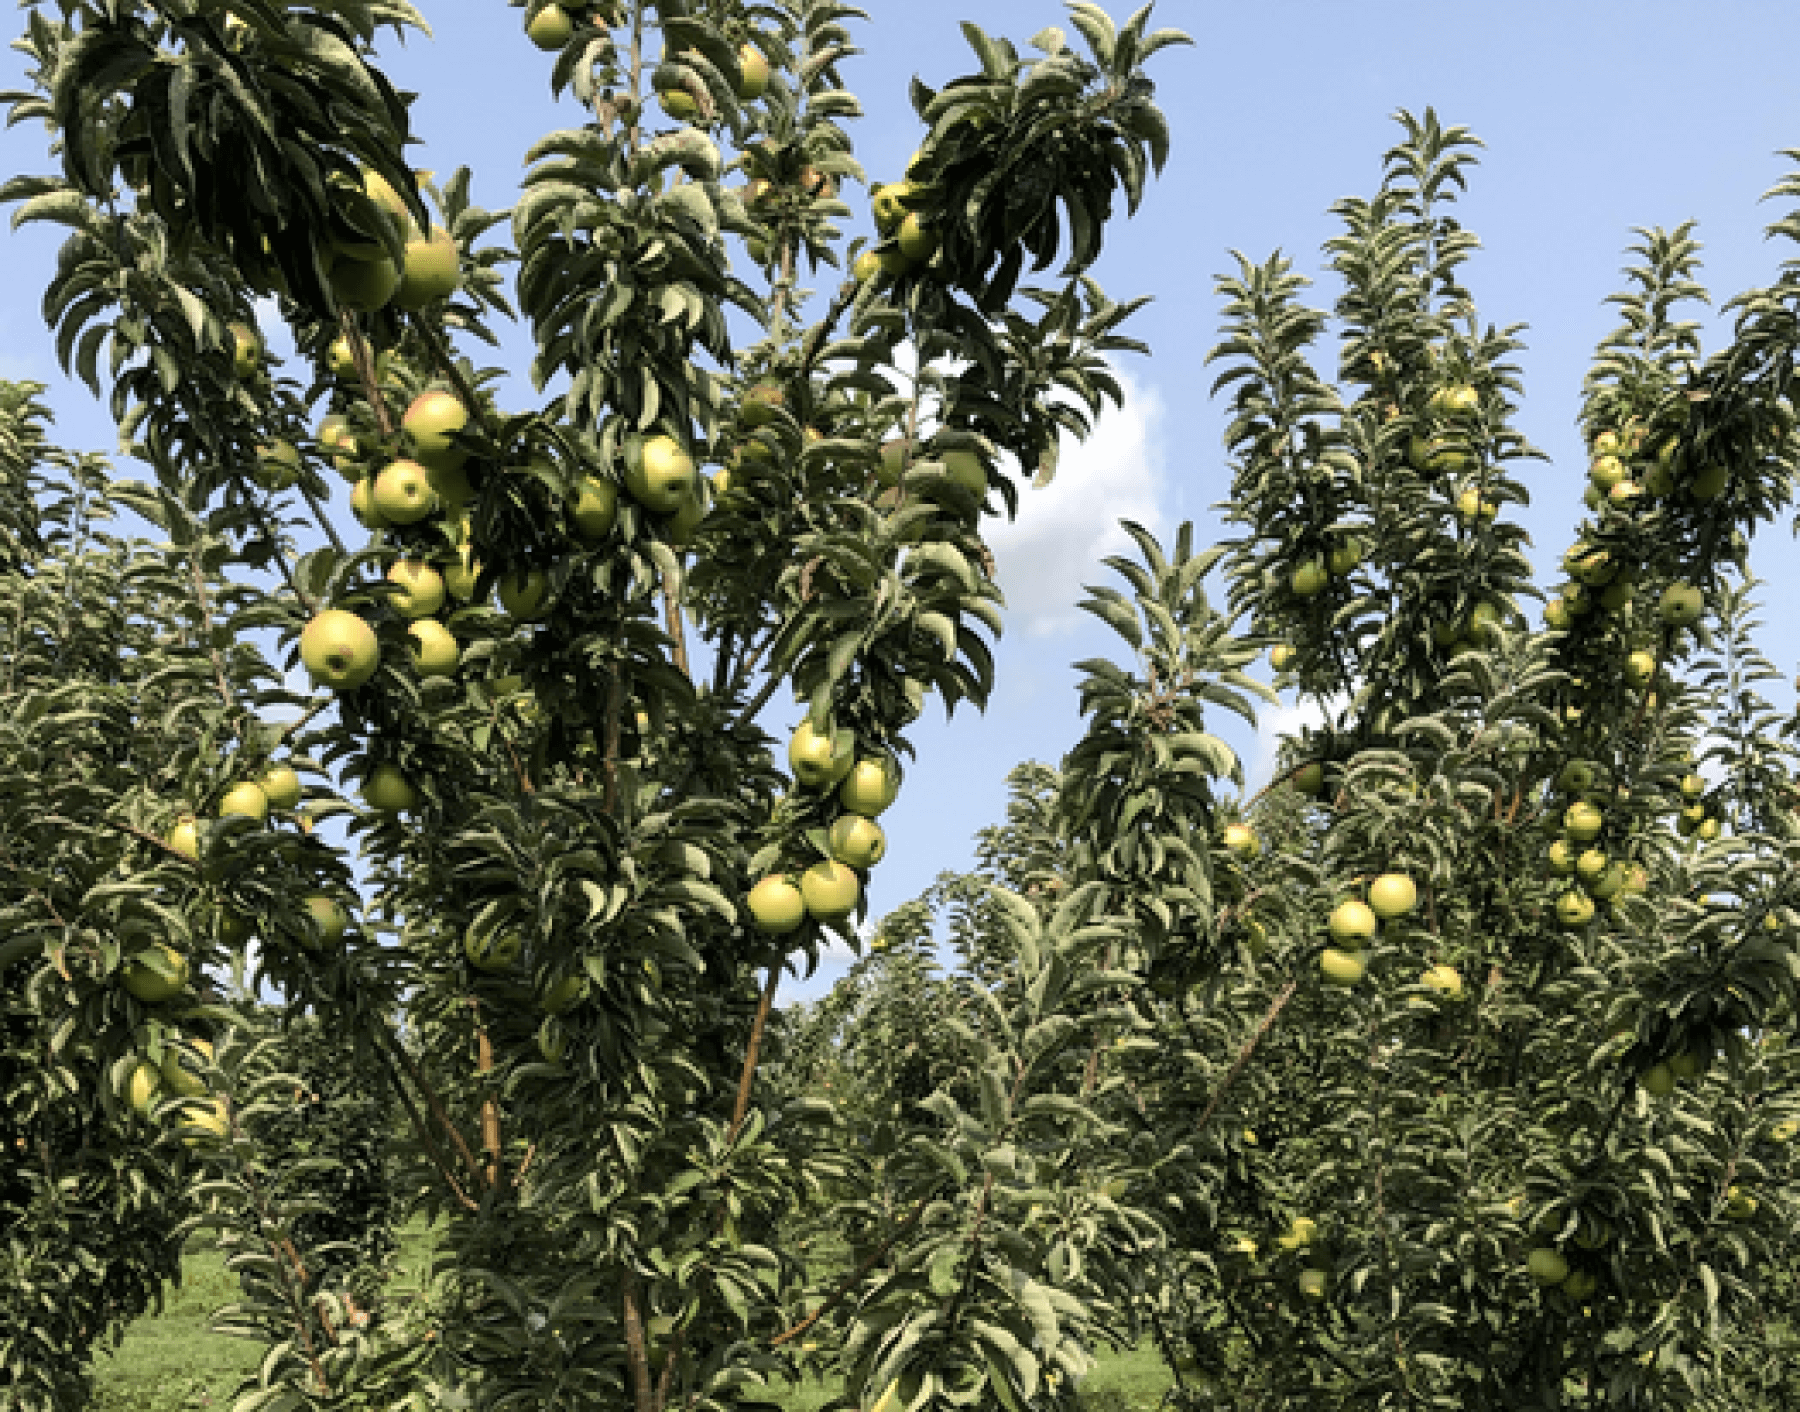 Expert advice about Growing Golden Delicious Apple Trees